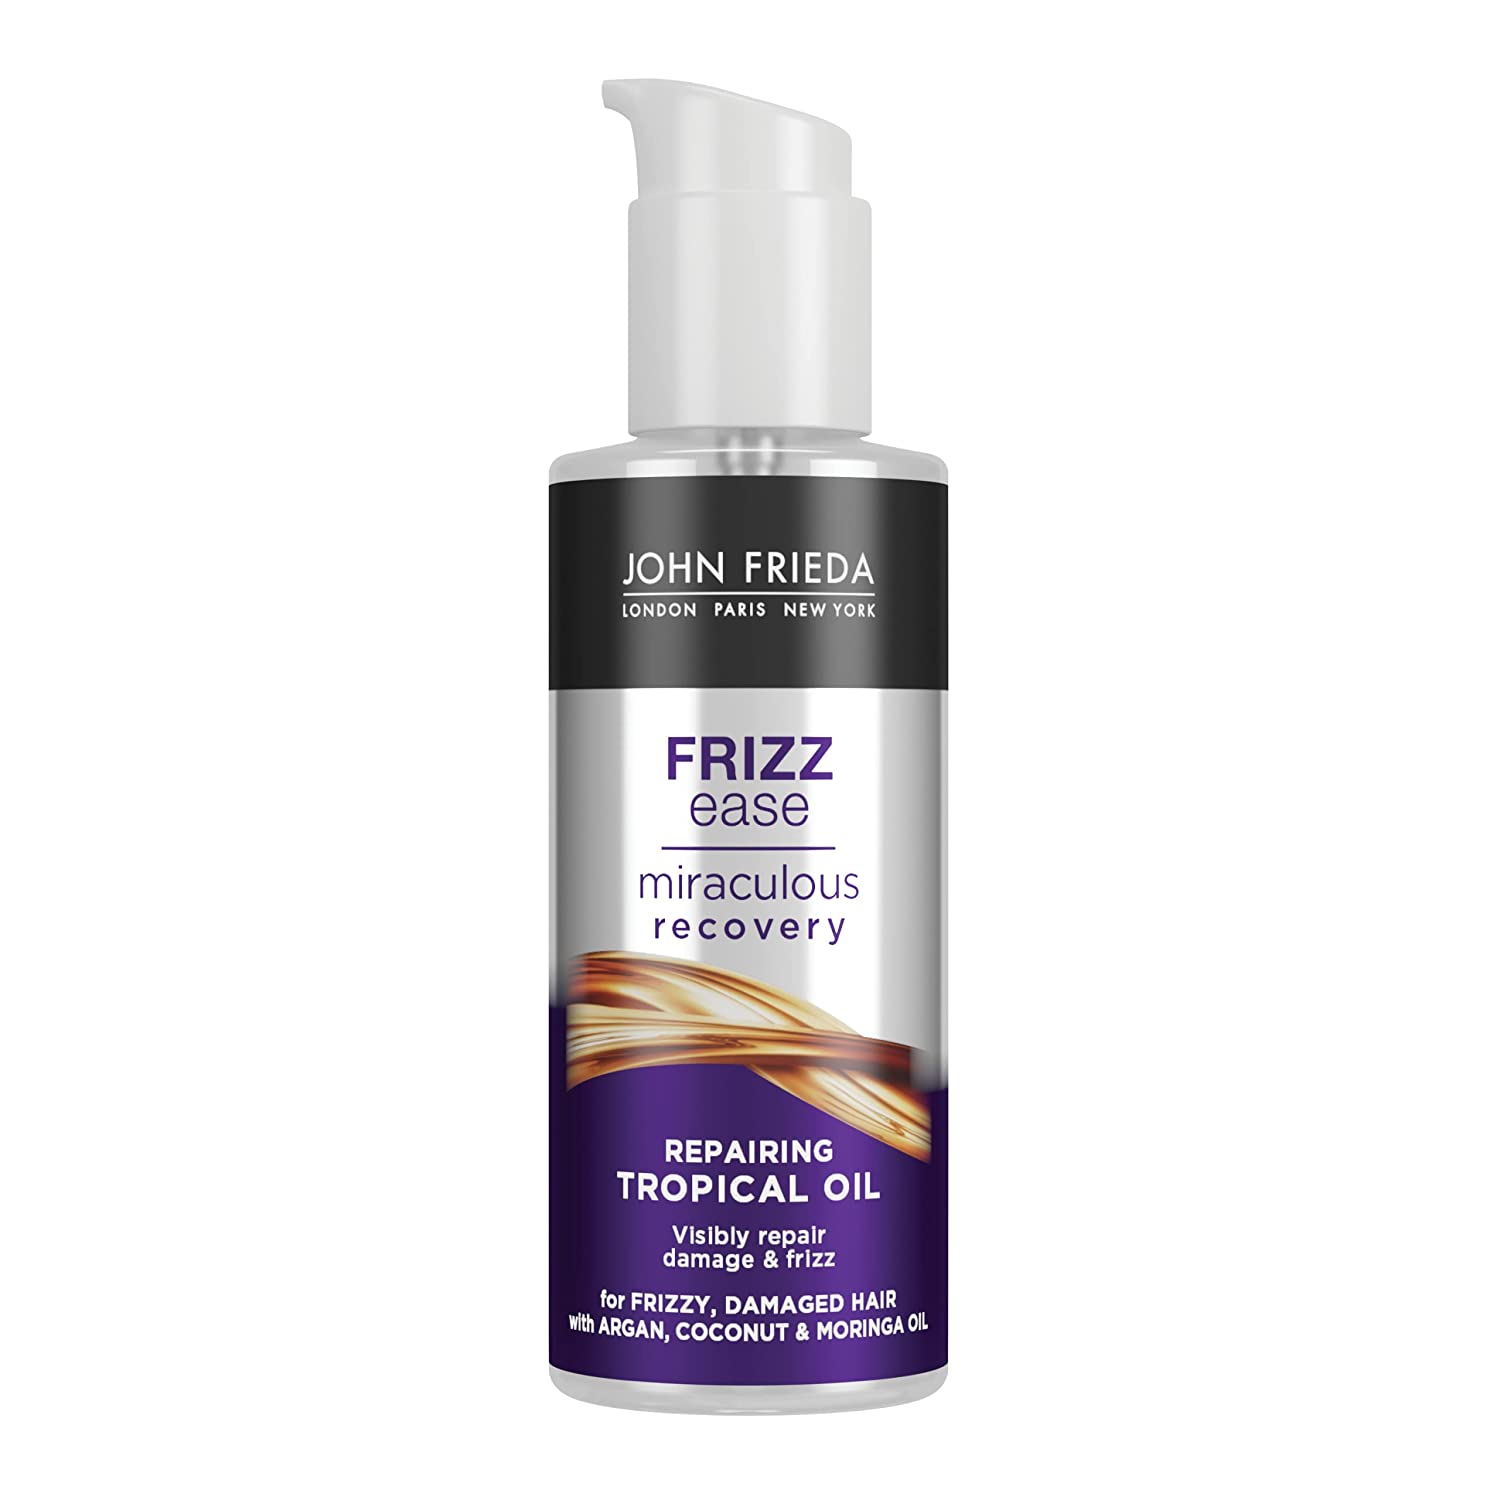 John Frieda Frizz Ease Hair Oil - Wunder Repair Series - Contents: 100 ml - Anti-Frizz Effect - Hair Type: Unruly, Frizzy, Damaged and Stressed, ‎purple